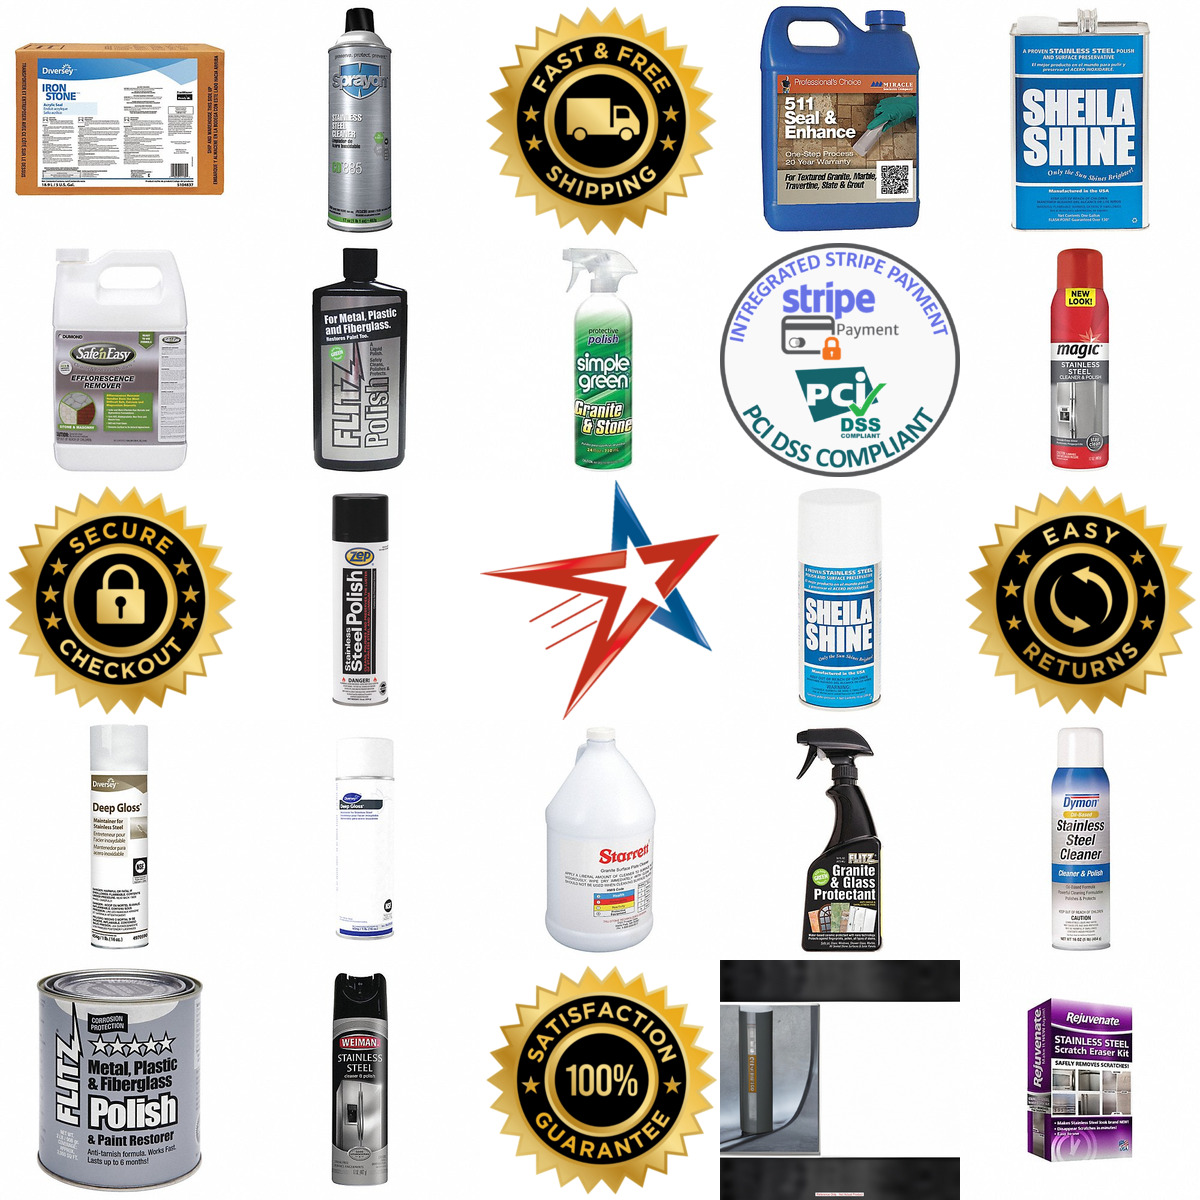 A selection of Metal Polish and Stone Care products on GoVets